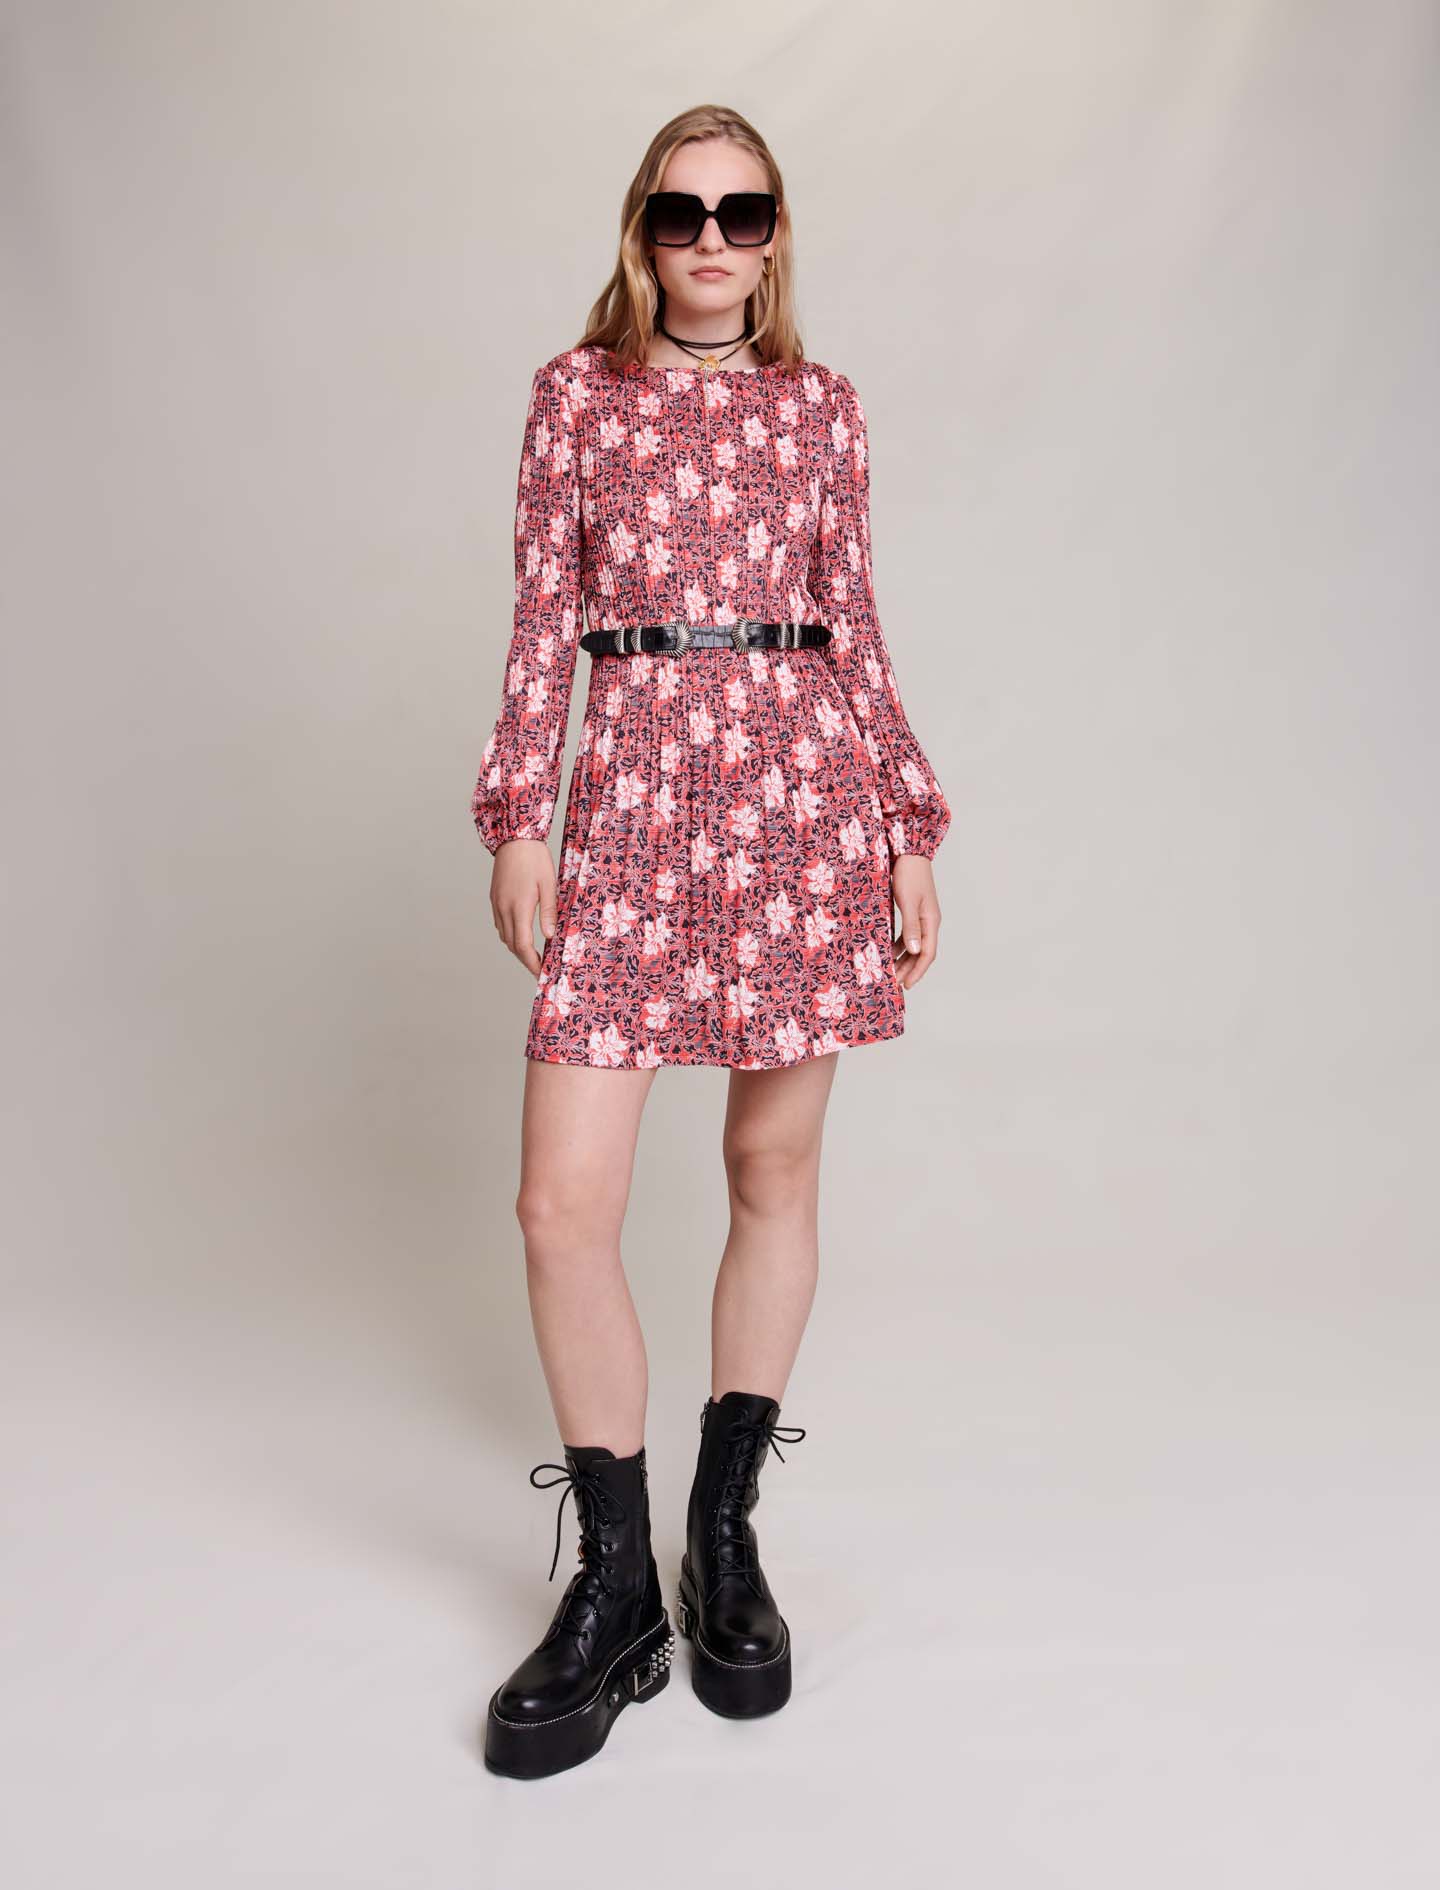 Mixte's polyester Short floral dress for Fall/Winter, size Mixte-Short dresses-US XL / FR 41, in color Red flowers lurex print /